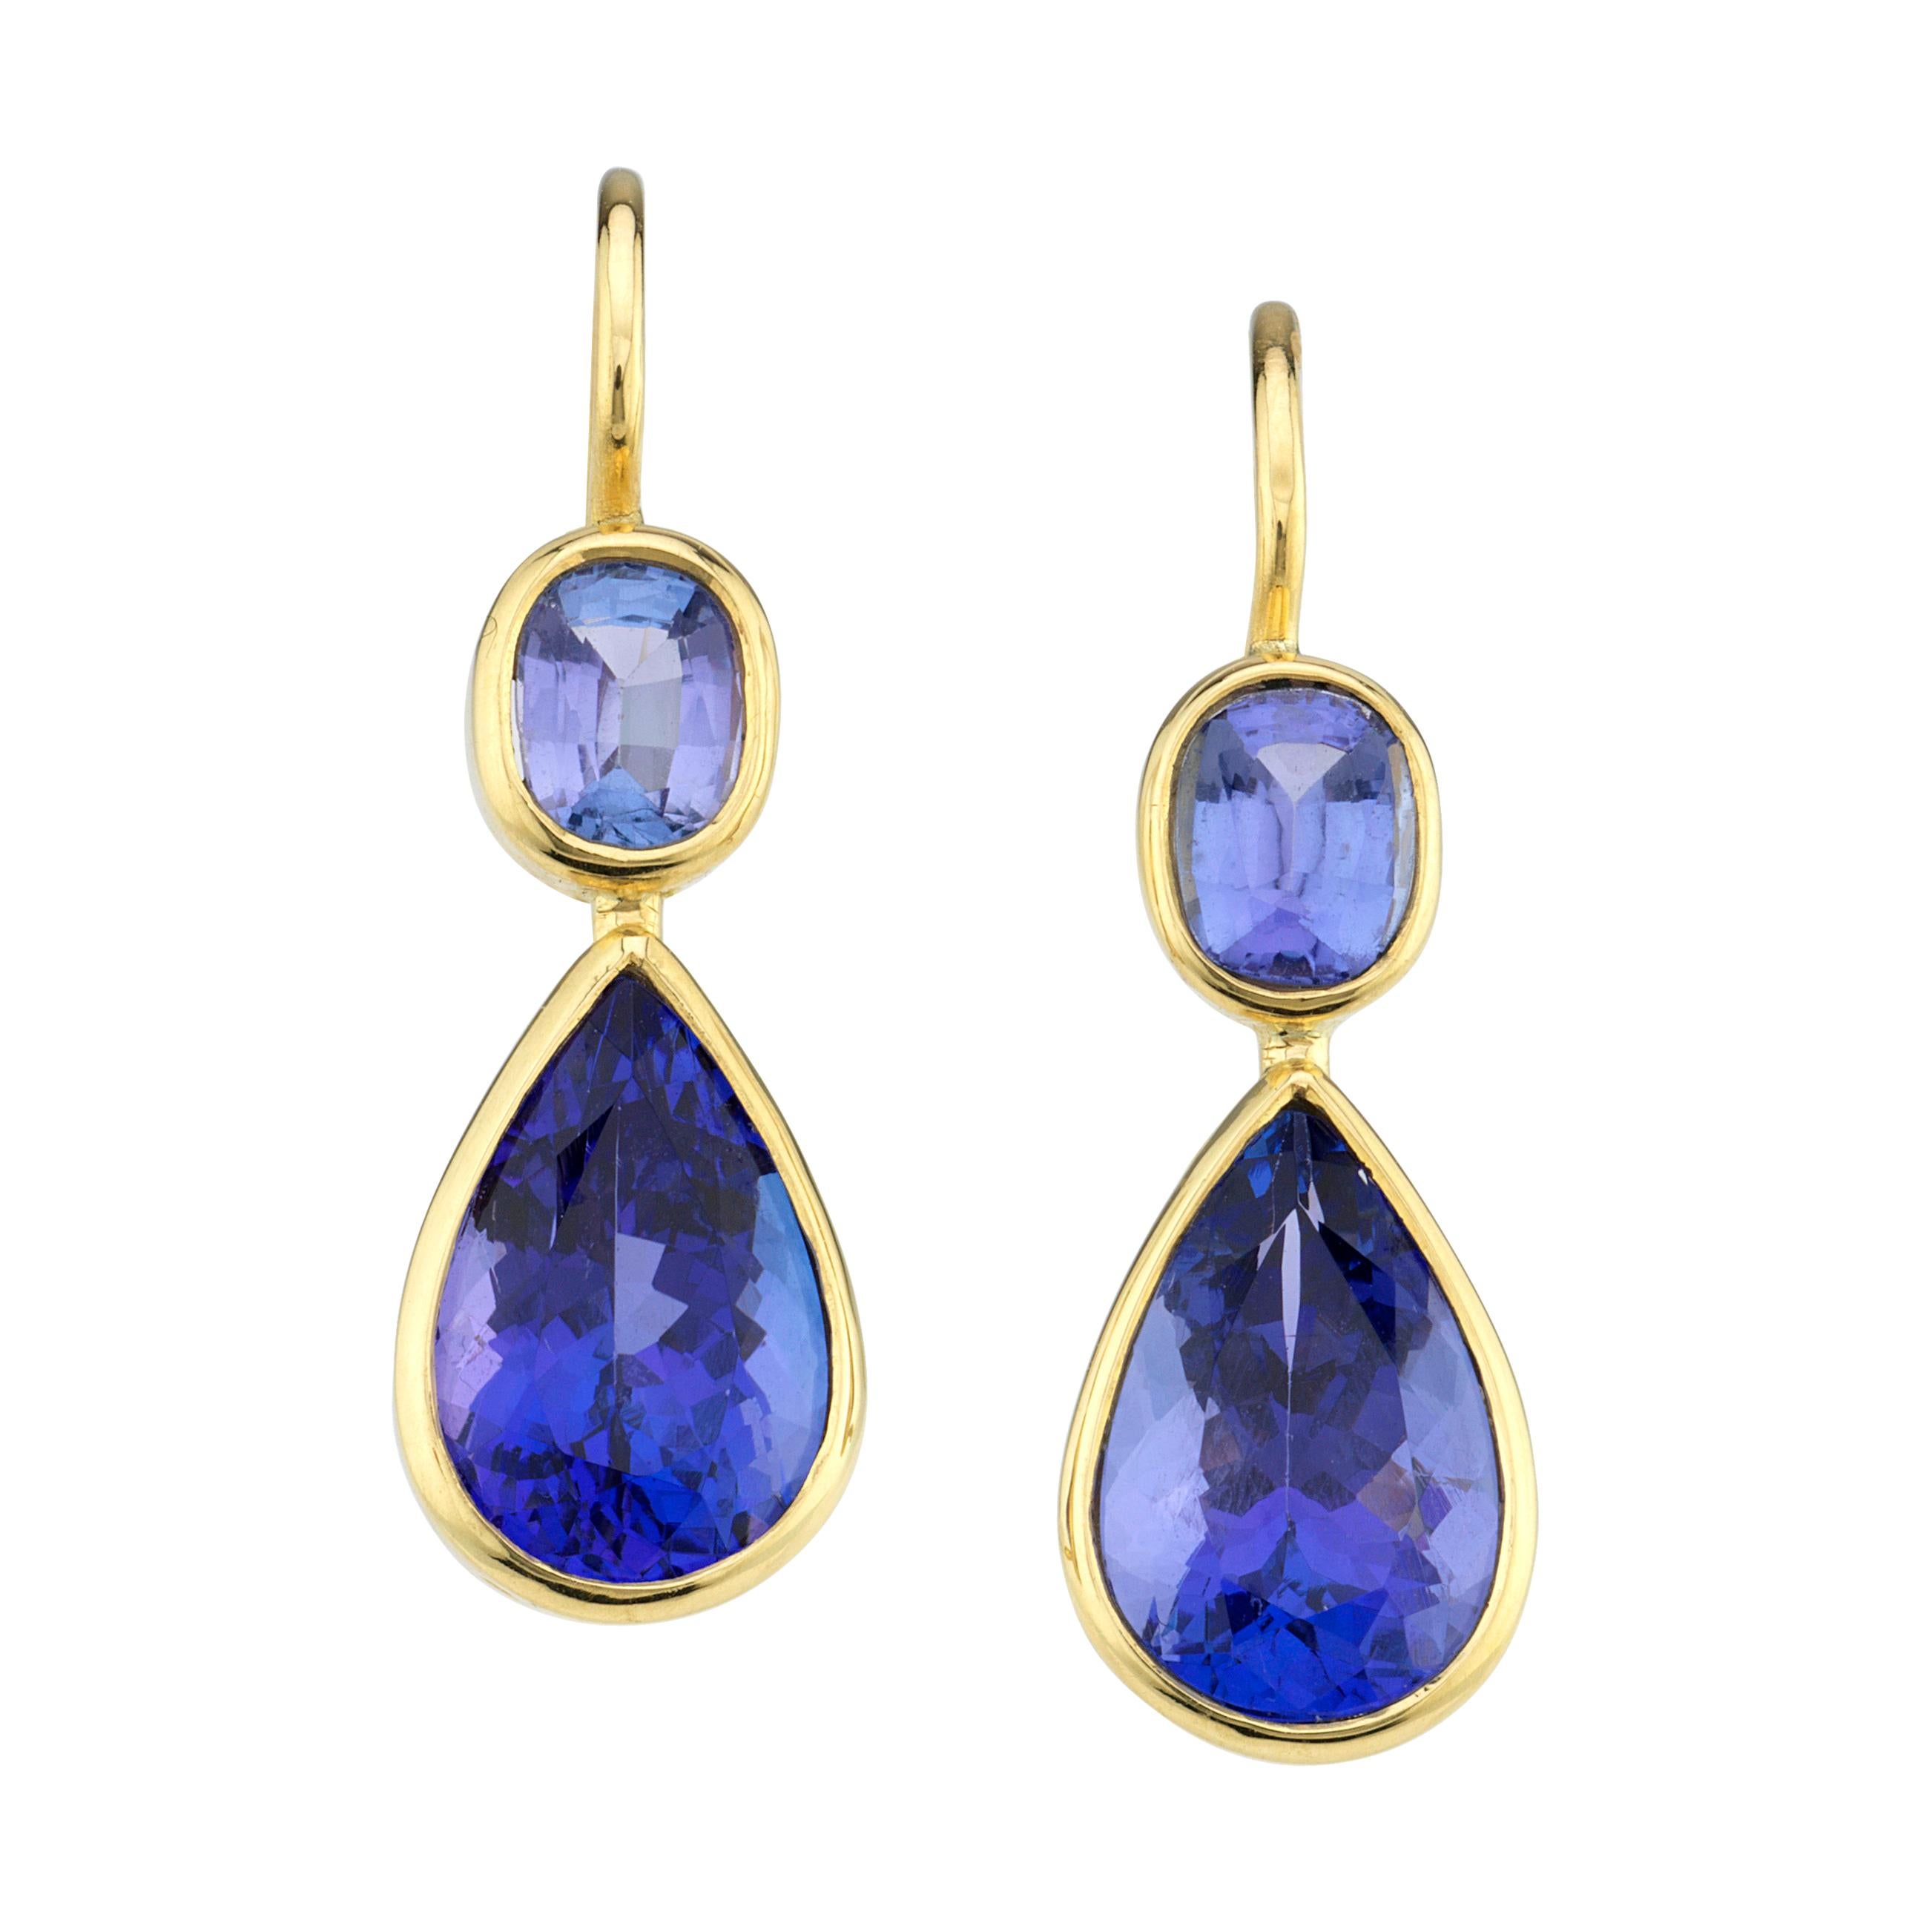 These tone-on-tone tanzanite earrings are suitable for day to evening wear.  Each earring is comprised of a light, violet colored, cushion shape tanzanite and a rich, medium-dark violet, pear shaped tanzanite. The tanzanites are bezel set in 18